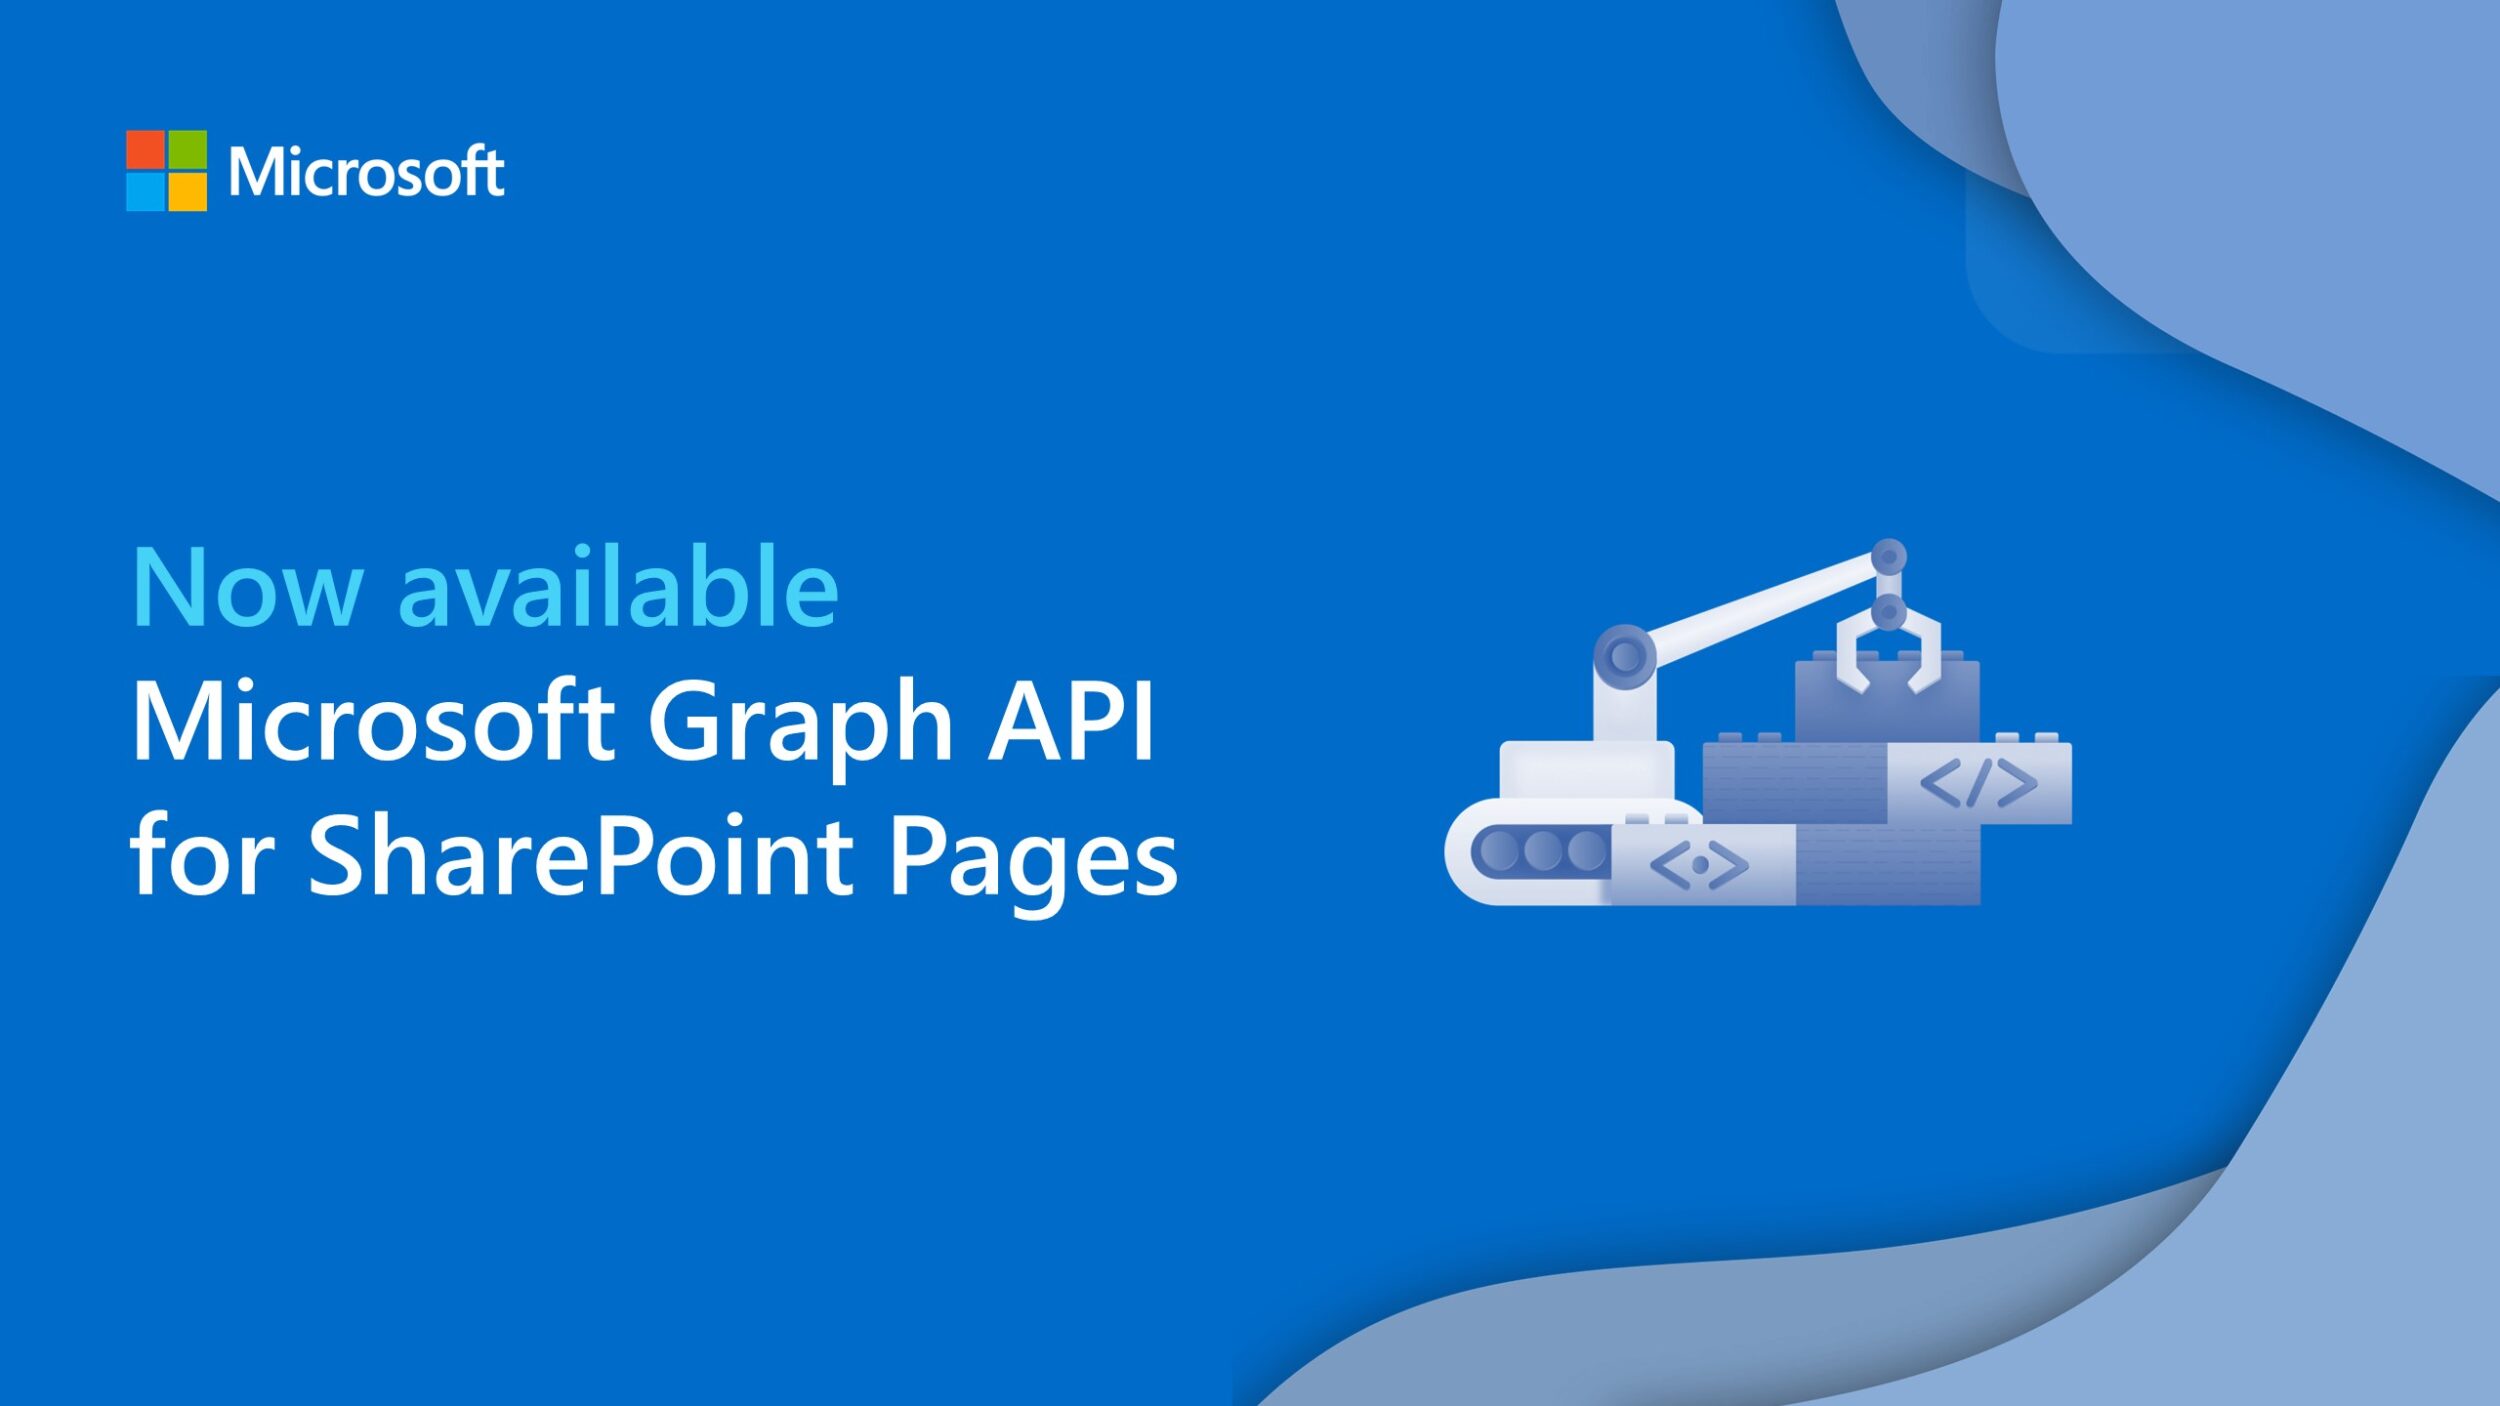 Microsoft Graph API for SharePoint Pages is now generally available